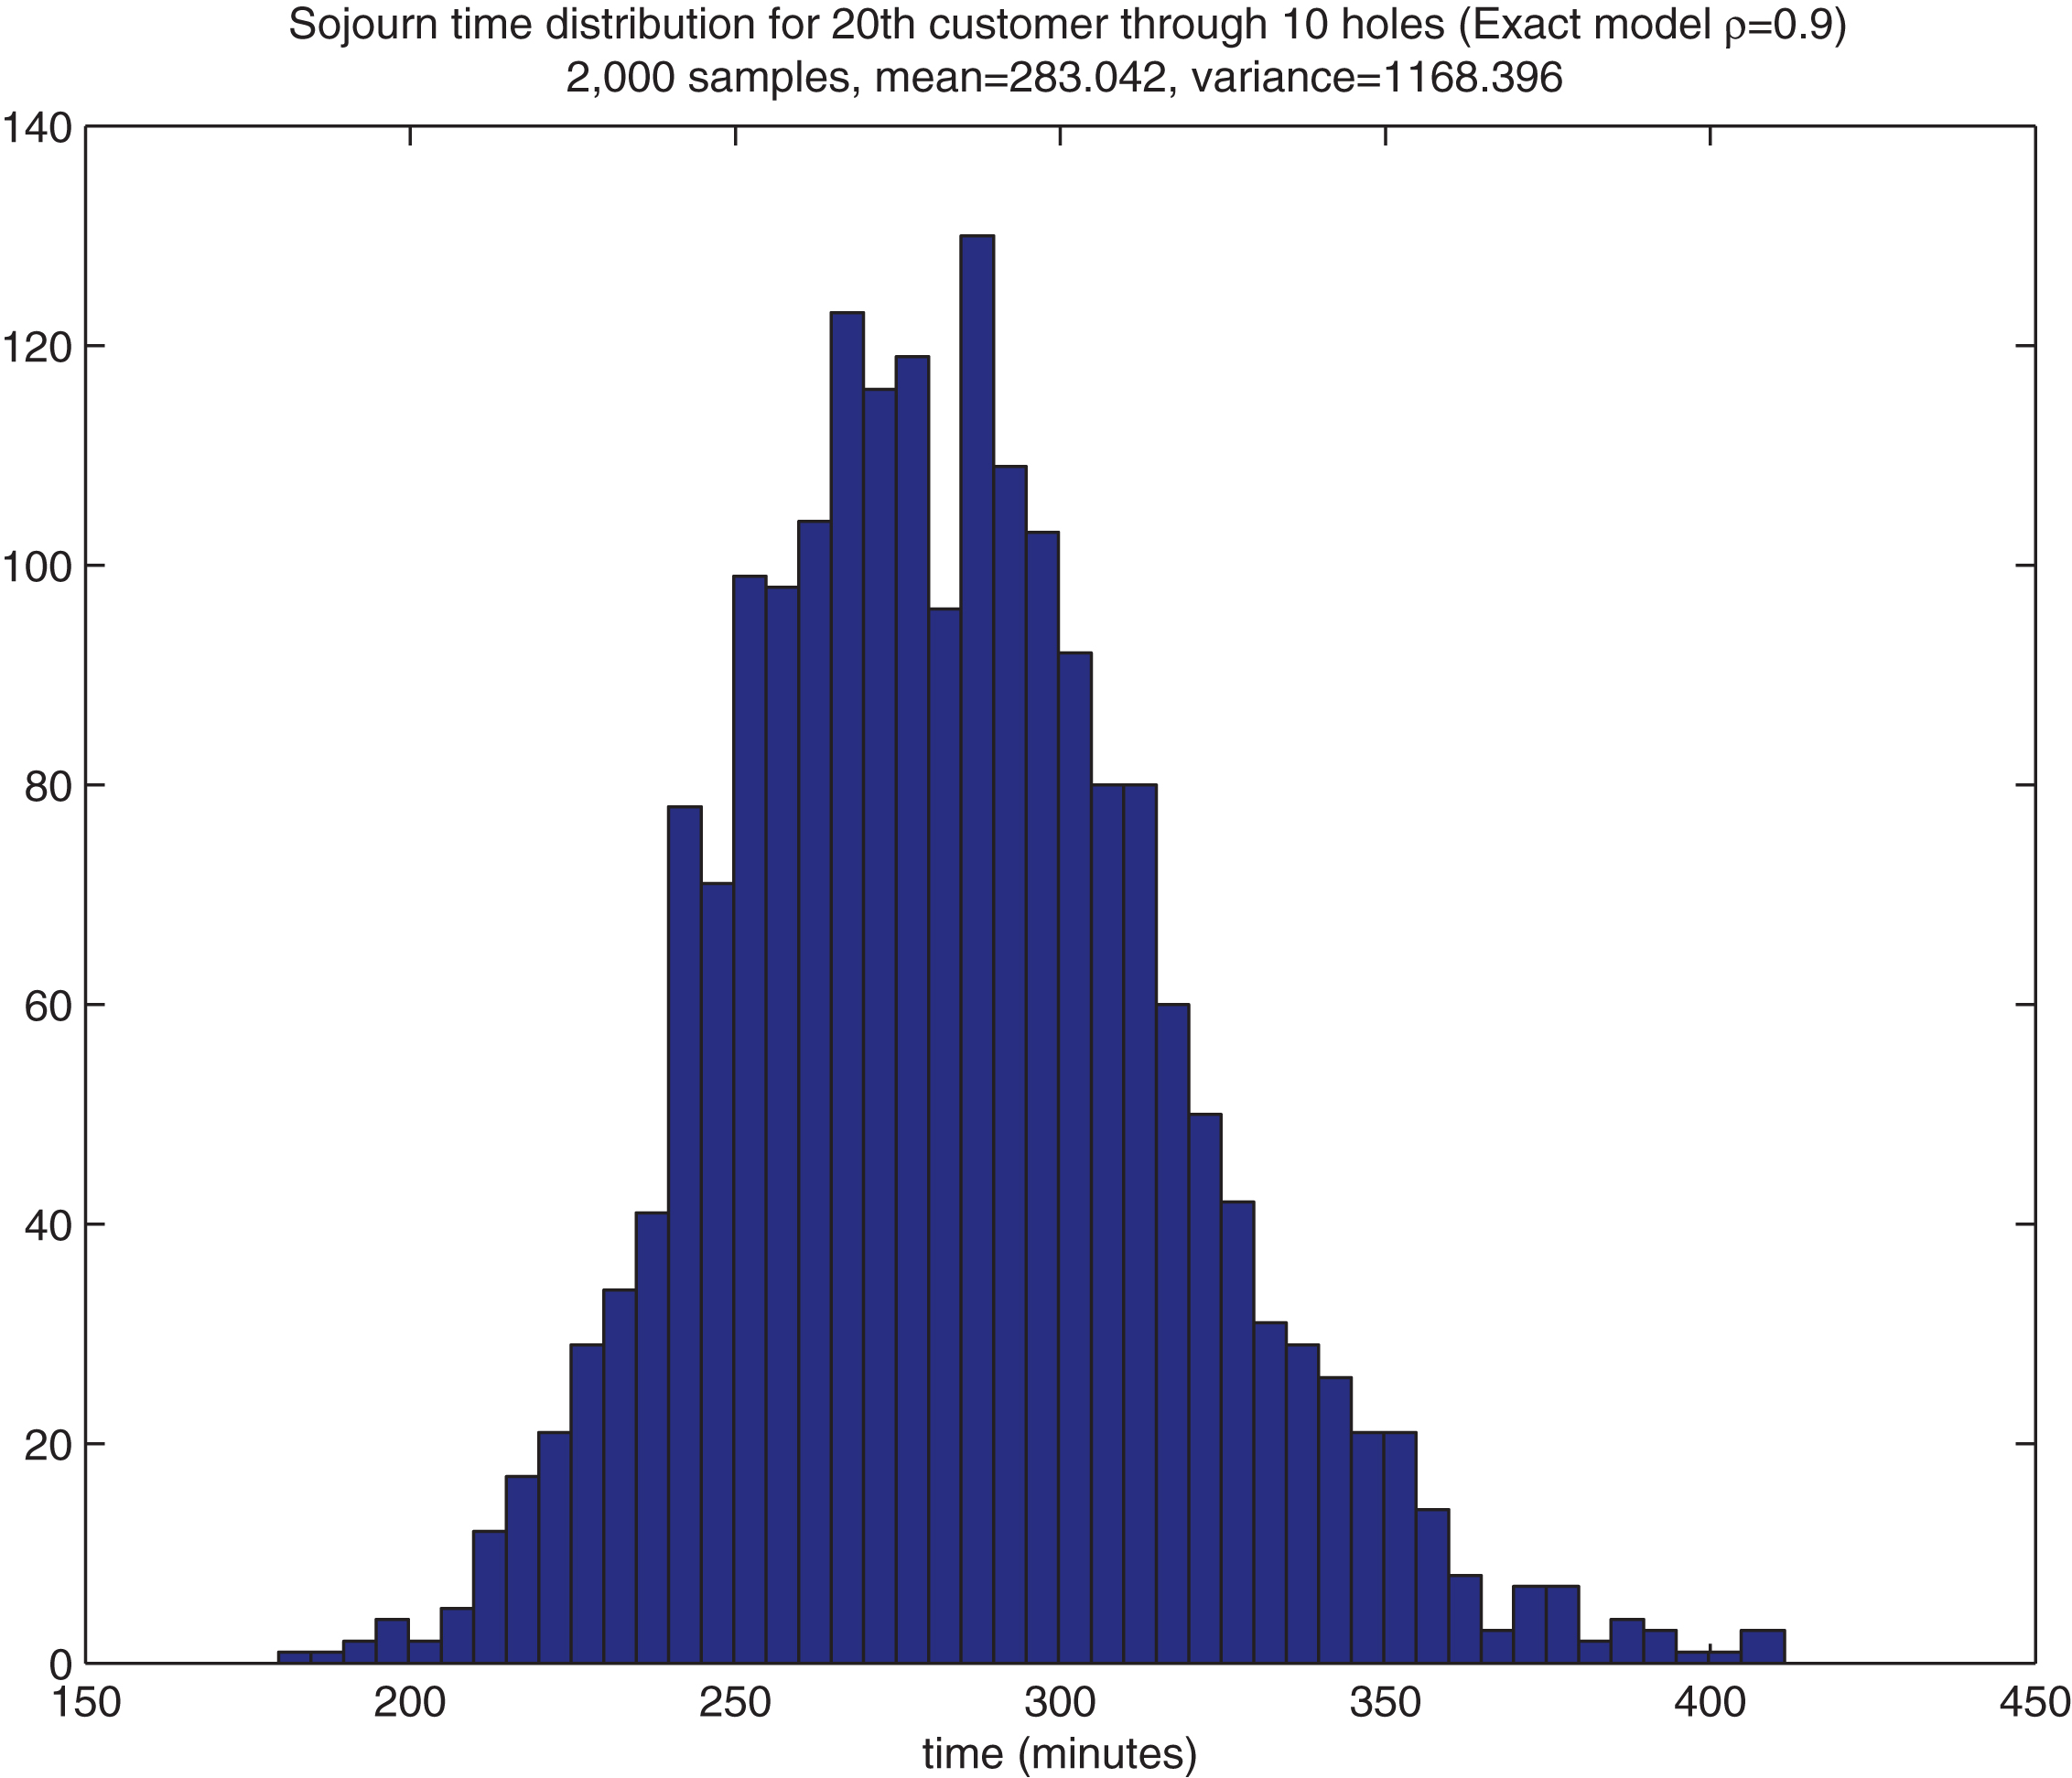 Histogram of the sojourn times V10,20 in the all exponential model with for ρ = 0.9.